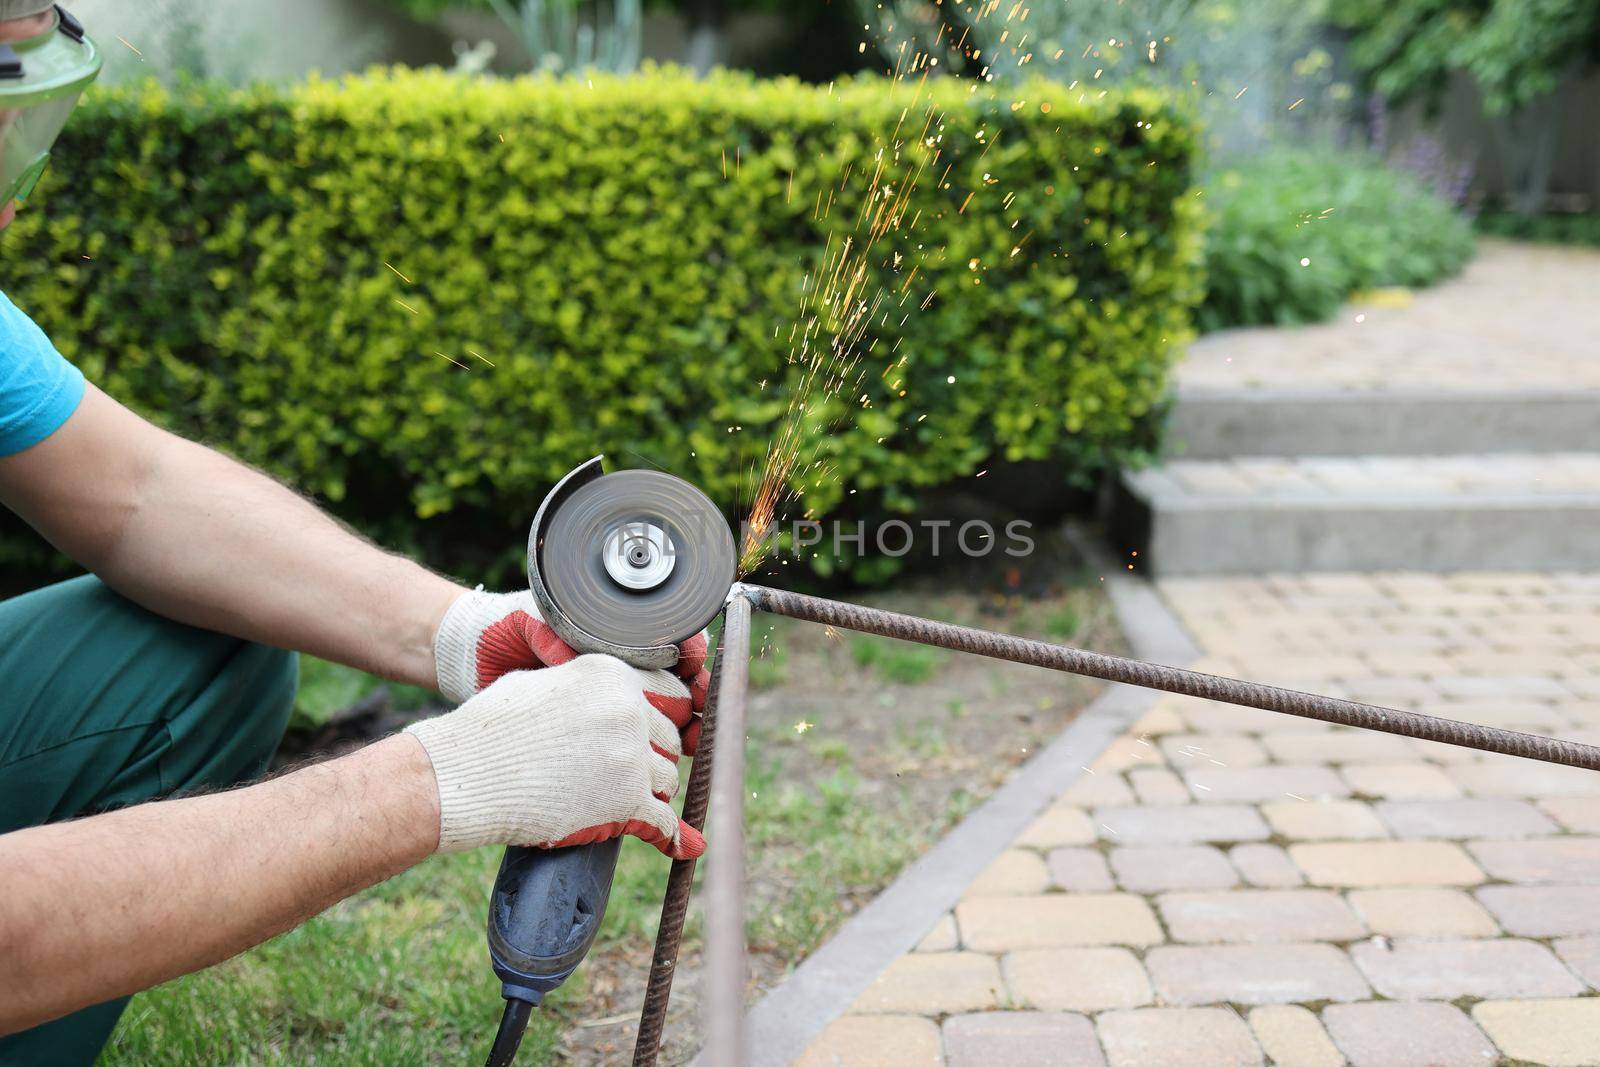 male hands in thick protective gloves cut an iron rod, sparks fly close-up. Cutting a metal rod with a burst of sparks. male repair work with electric tool in the garden.